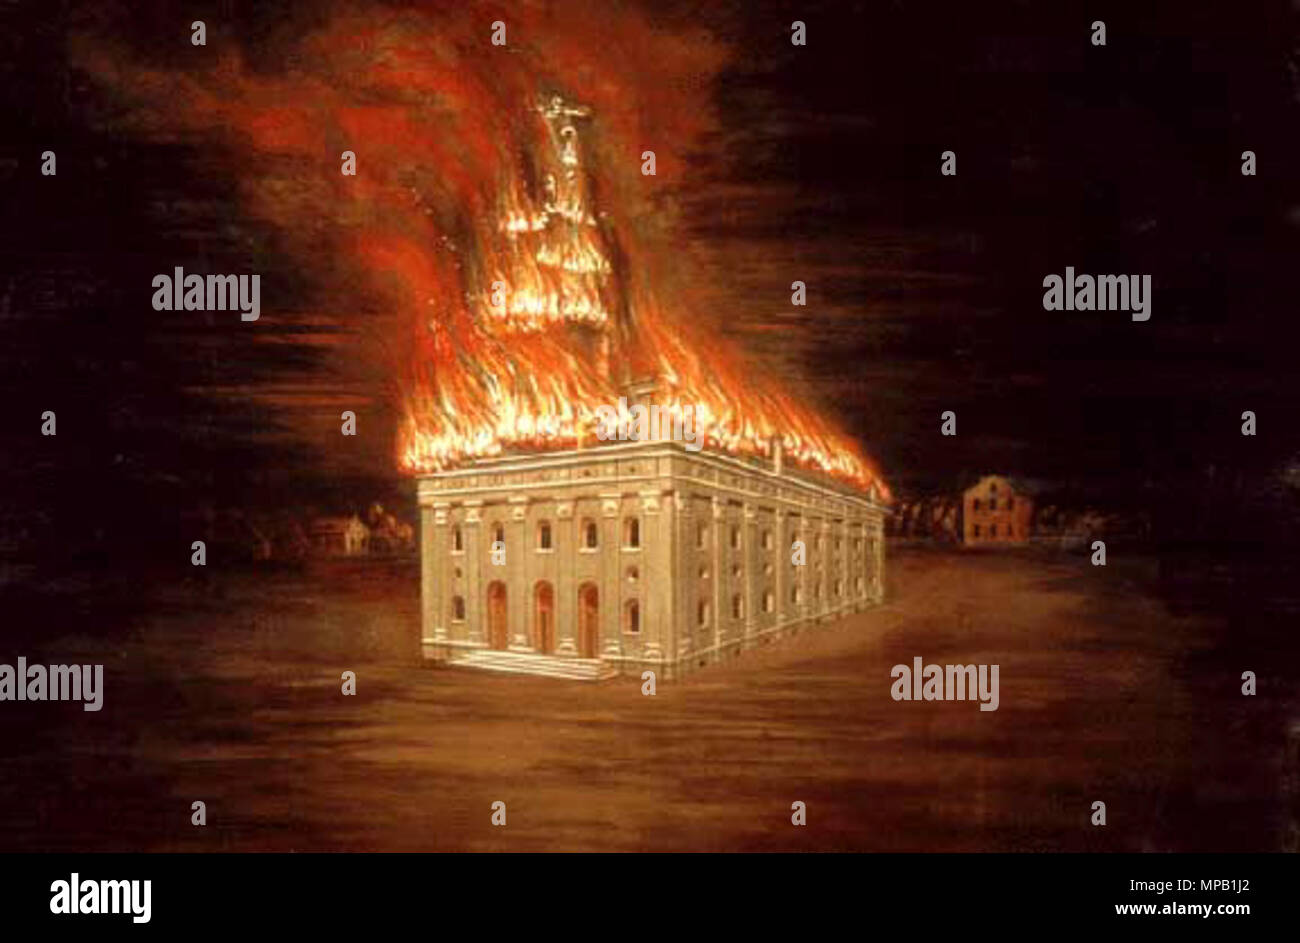 Burning of the Temple . an illustration of the burning of the Nauvoo Temple. 19th century.    C. C. A. Christensen  (1831–1912)     Alternative names C.C.A. Christensen  Description Danish painter and hymnwriter Focused on Mormon and Utah topics, especially LDS Church history  Date of birth/death 28 November 1831 3 July 1912  Location of birth/death Copenhagen, Denmark Ephraim, Utah  Authority control  : Q2938881 VIAF: 35868176 ULAN: 500024335 LCCN: n84216435 RKD: 16744 WorldCat 920 Nauvootemplefirecca Stock Photo